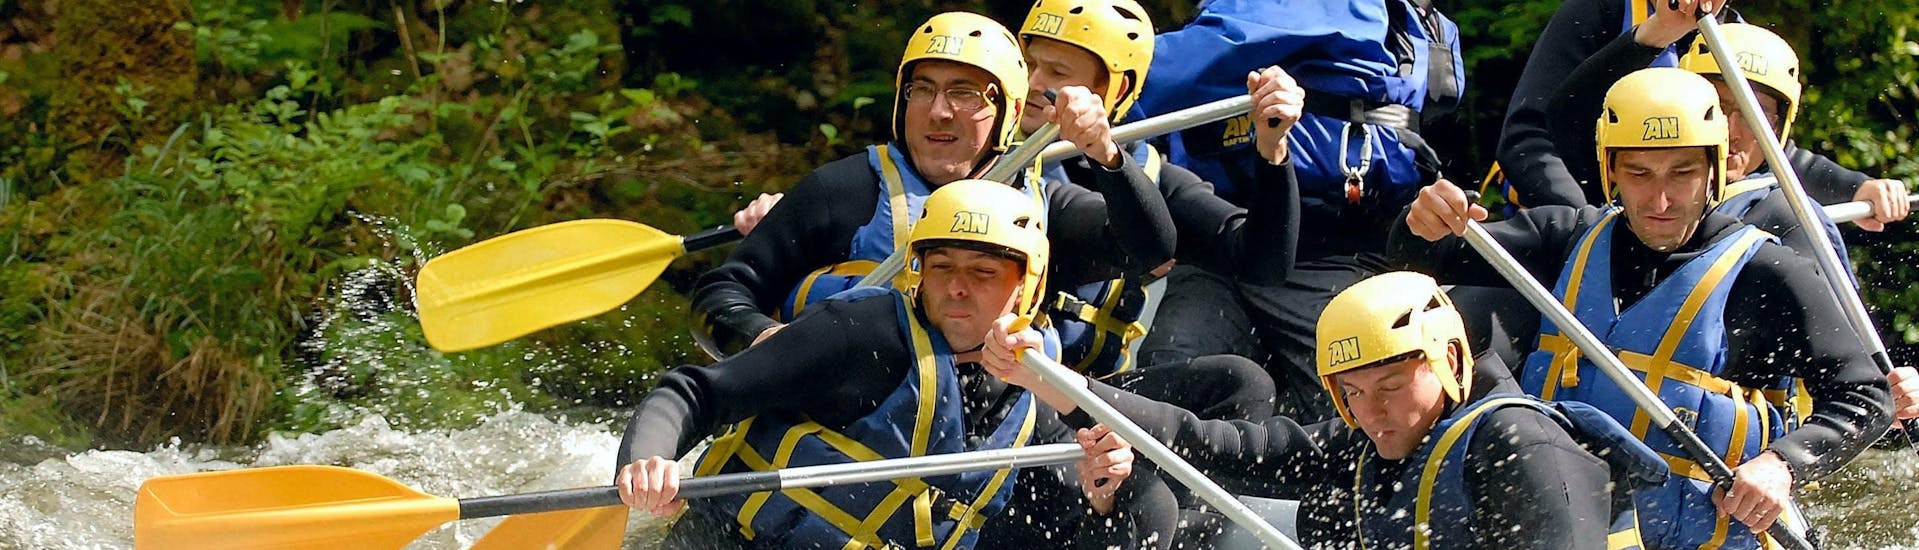 private-rafting-le-chalaux-an-morvan-hero